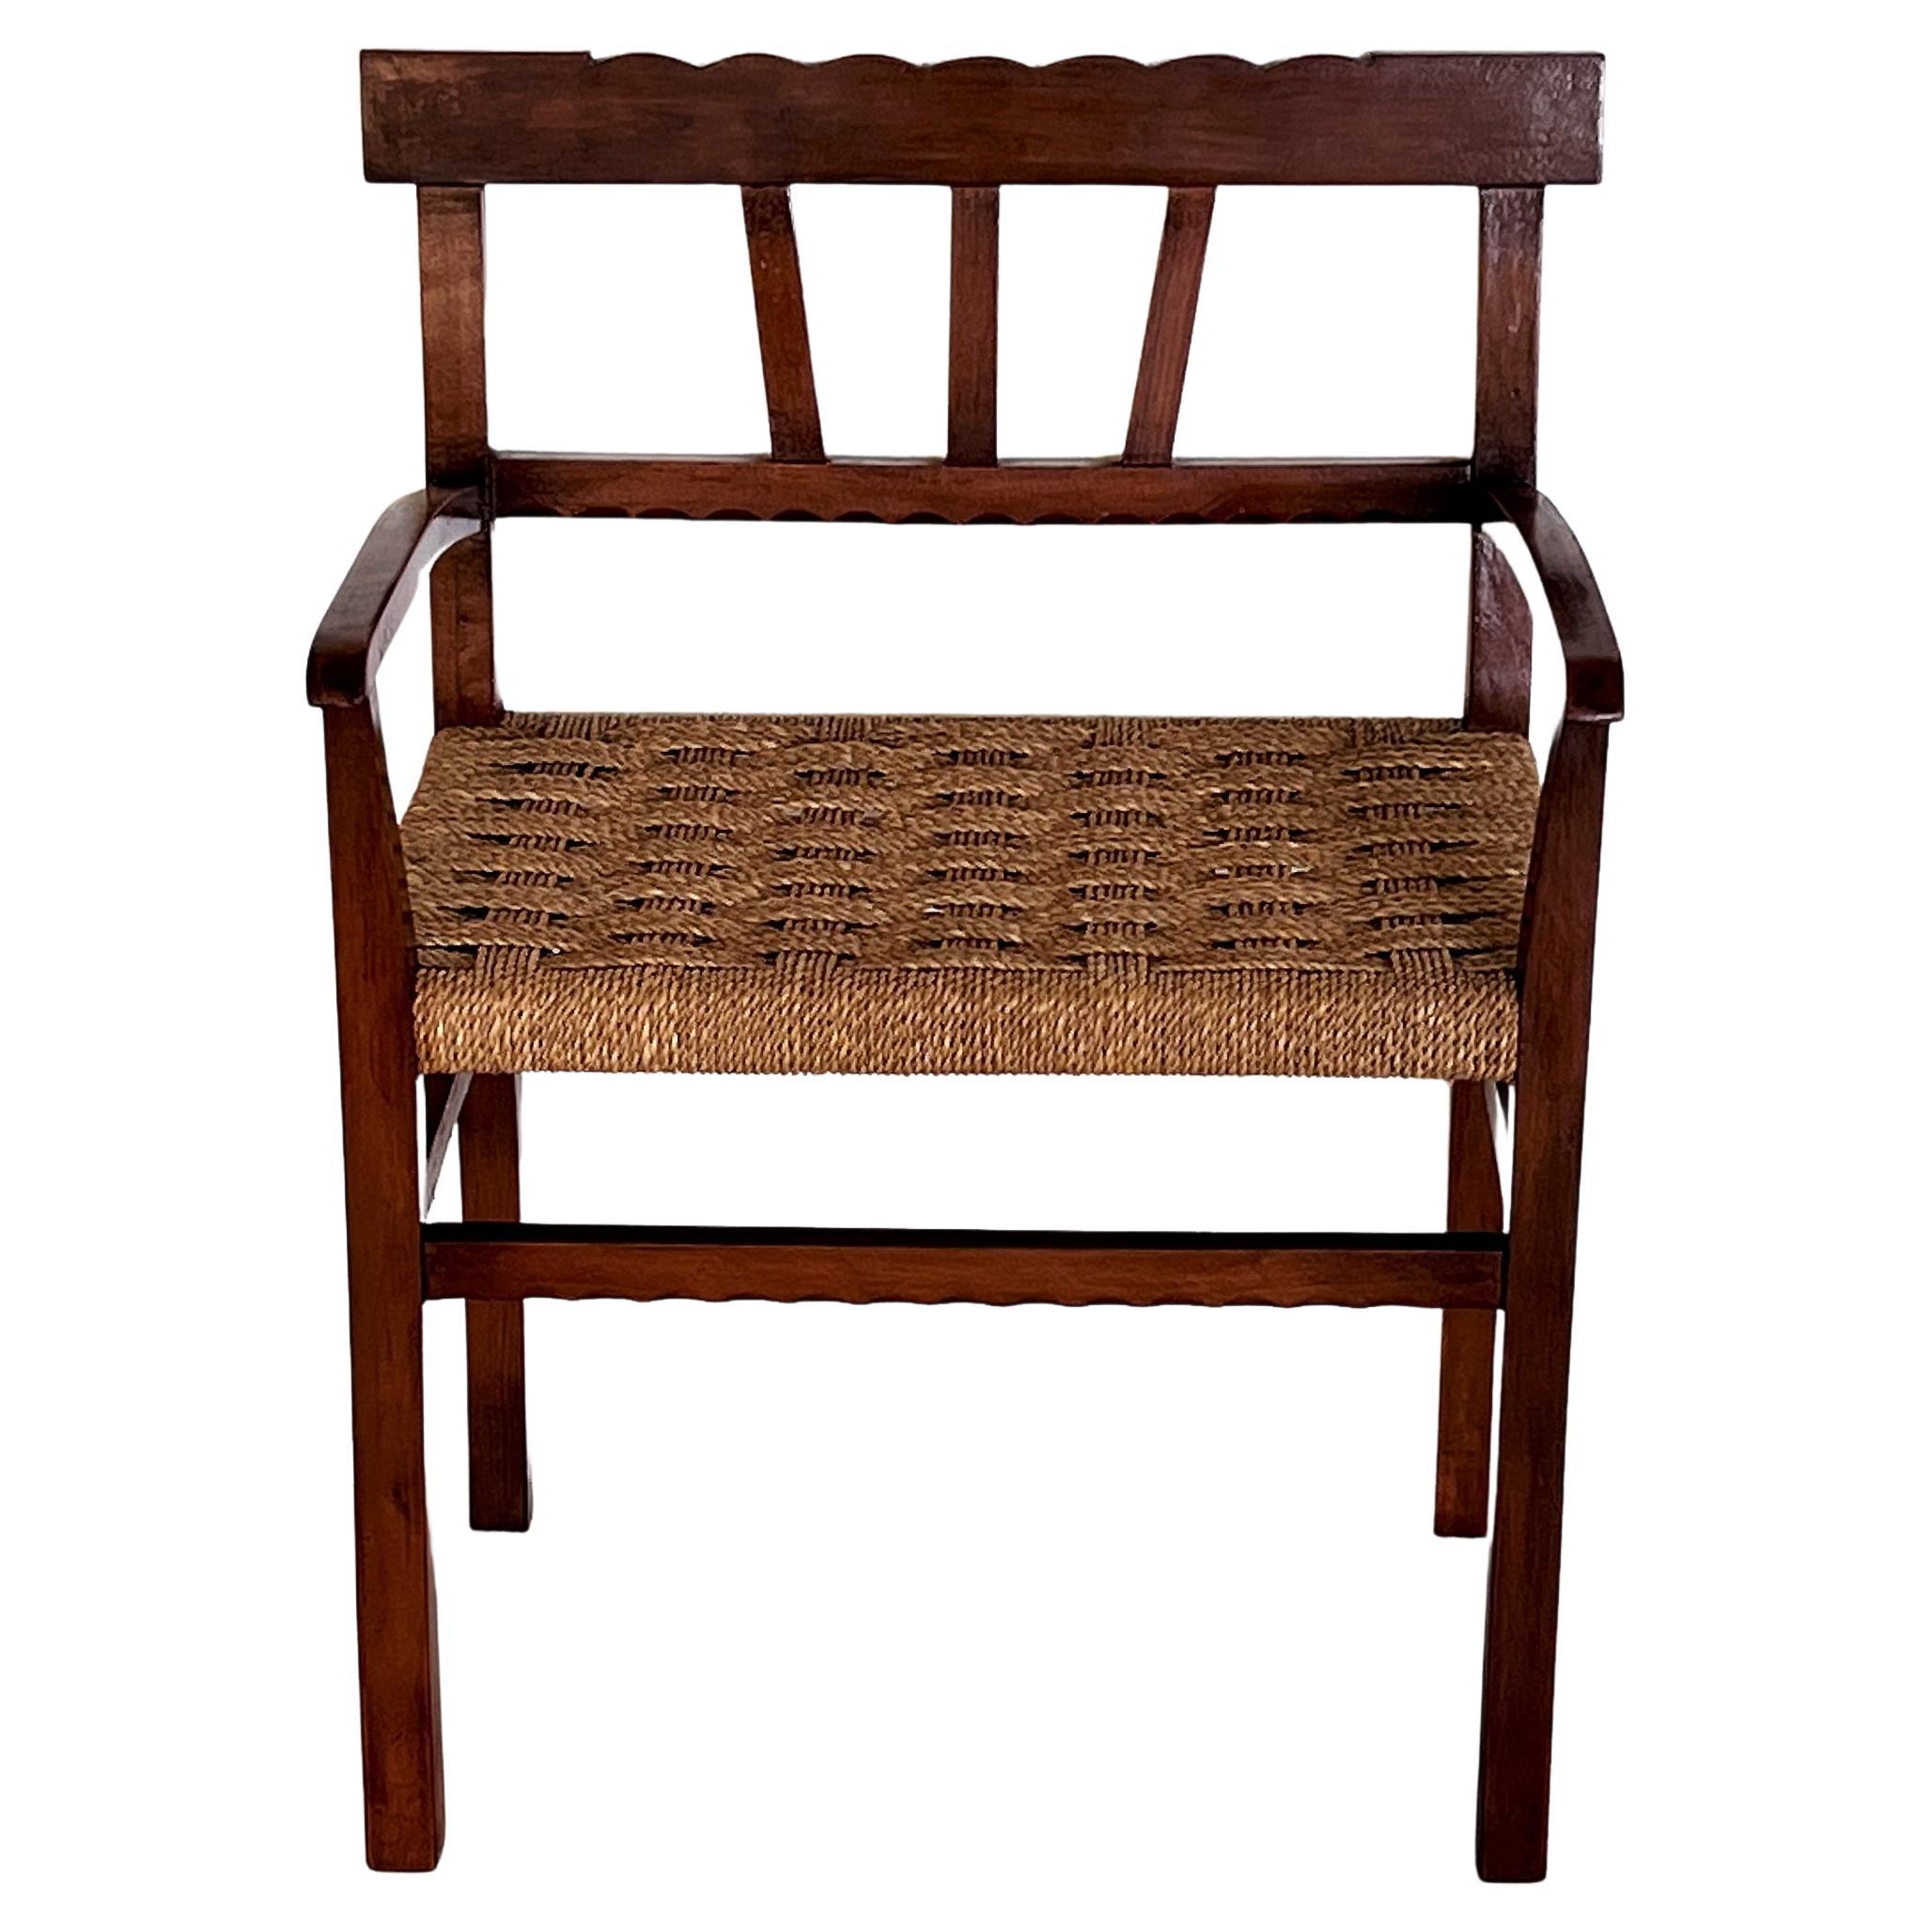 Italian Classic Large Beechwood Chair with Hand-Crafted Rope Seat, 1980s For Sale